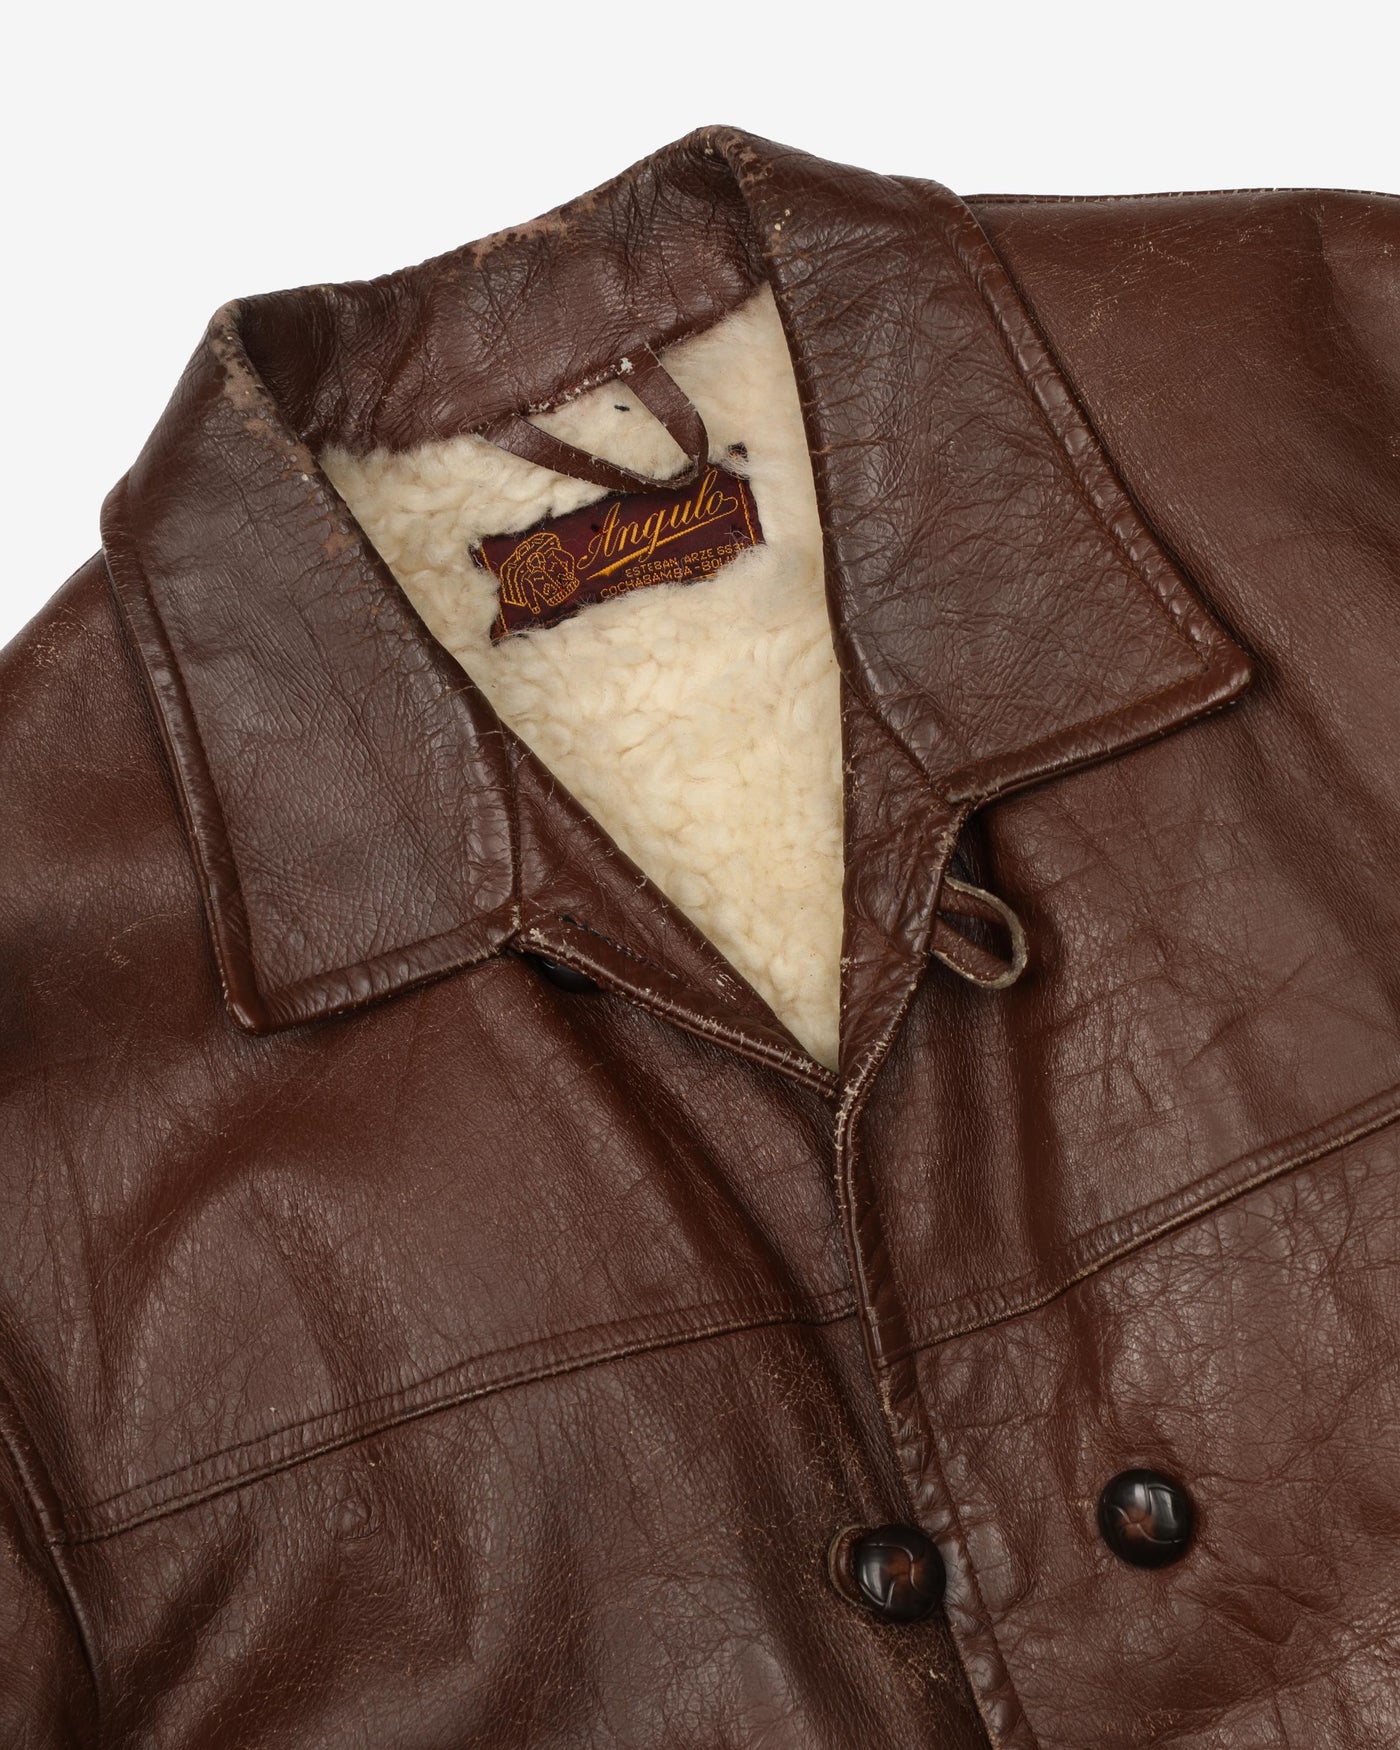 Vintage 70s Angulo Brown Fur Lined Leather Jacket - M